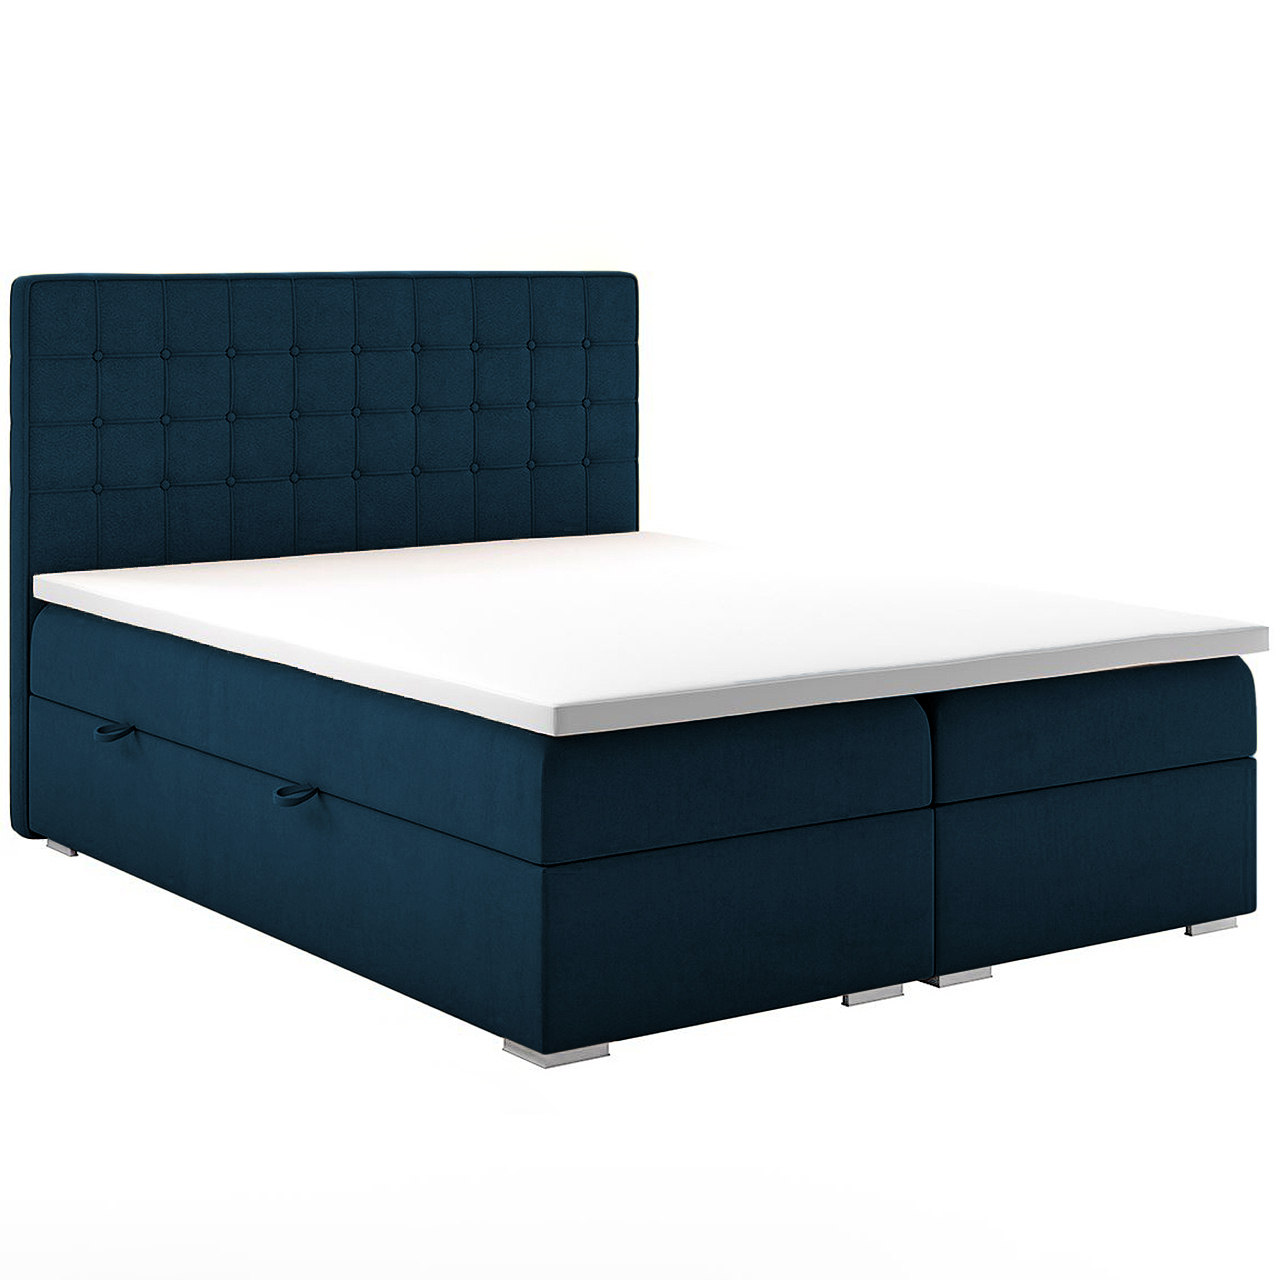 Upholstered bed CARLOS 140x200 monolith 76